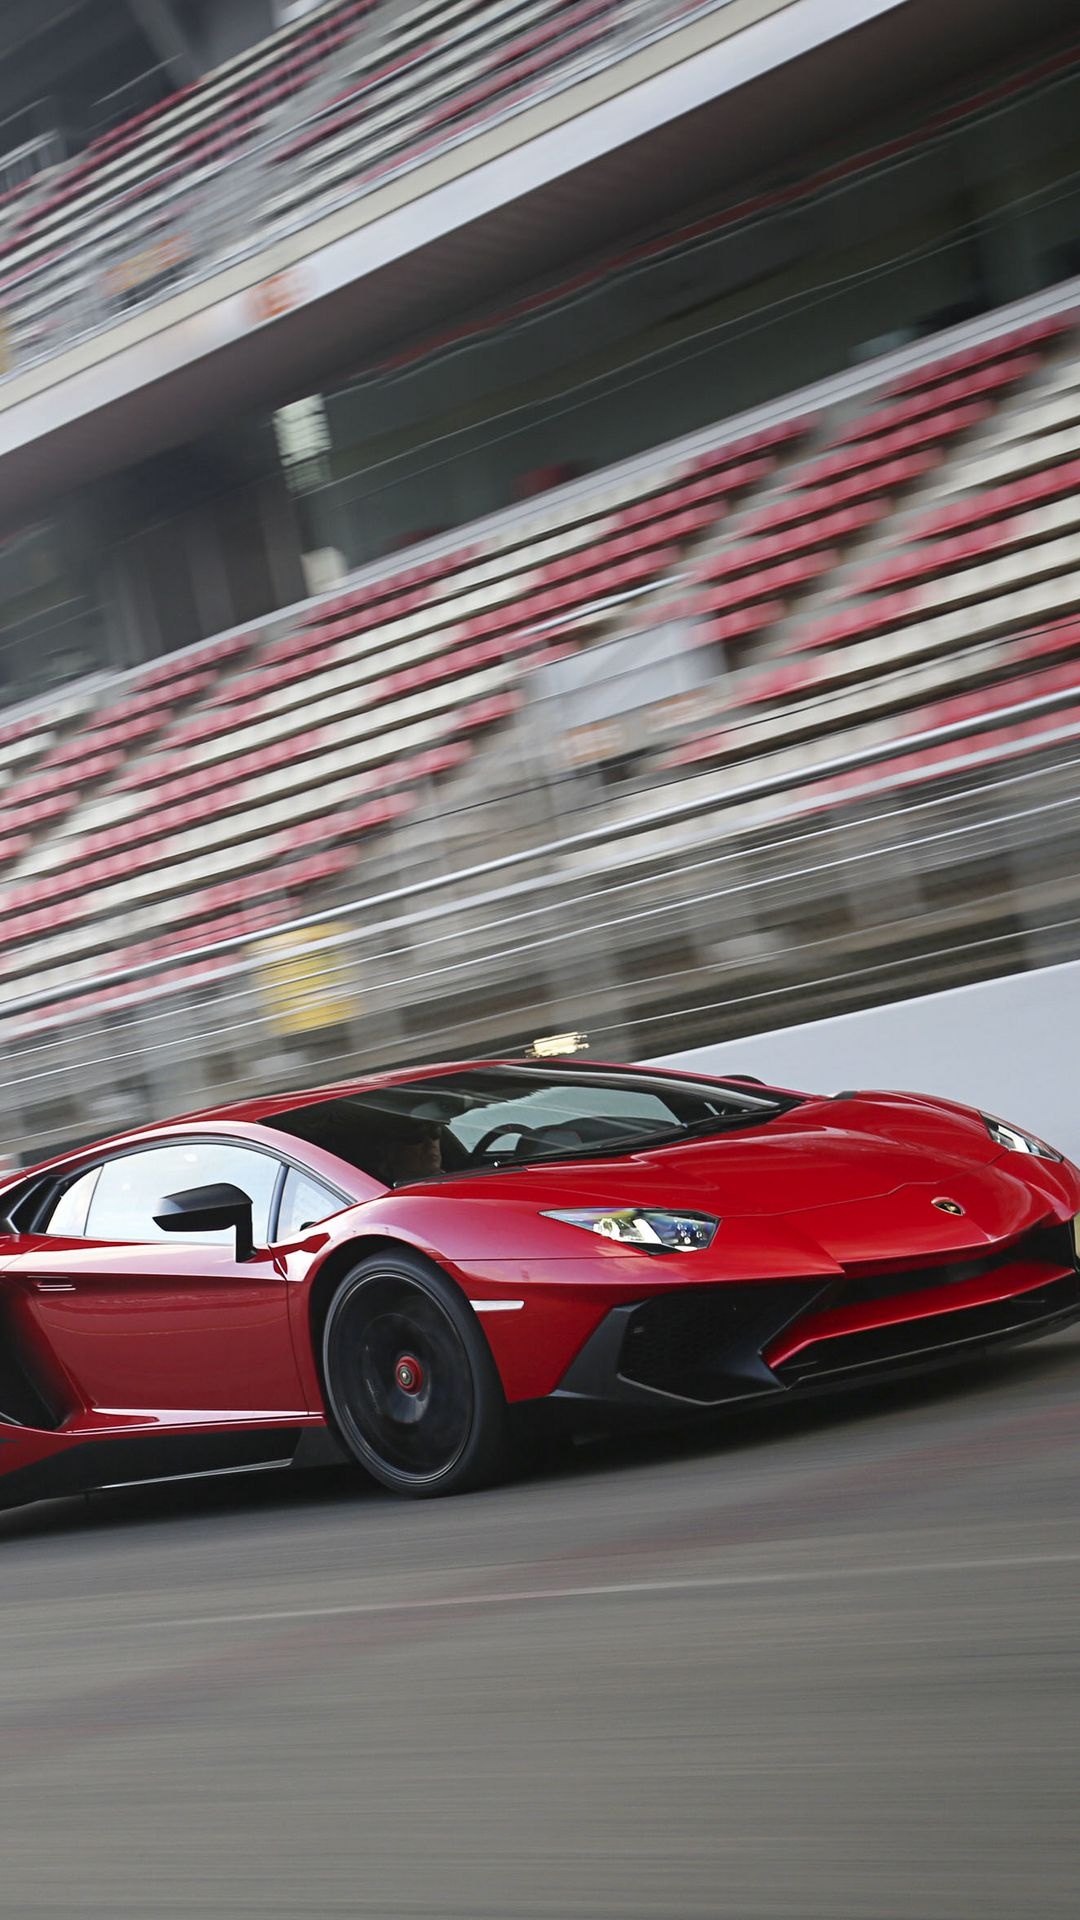 Aventador wallpapers, Smartphone backgrounds, Stunning visuals, Automotive excellence, 1080x1920 Full HD Phone